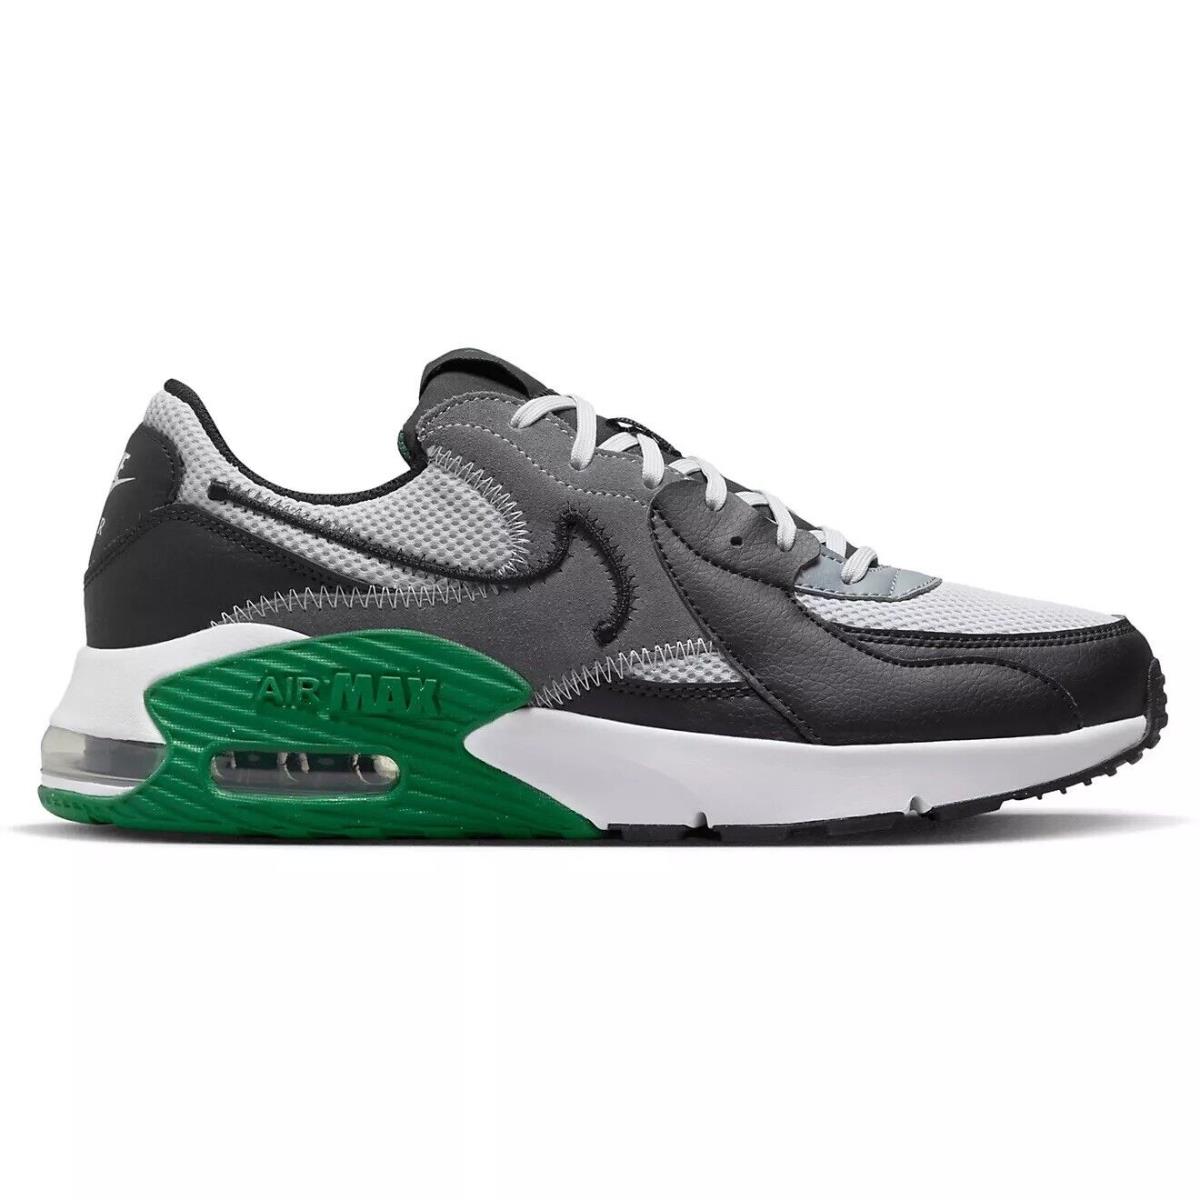 Mens Nike Air Max Excee Running Shoes Sneakers White Black Green CD4165 018